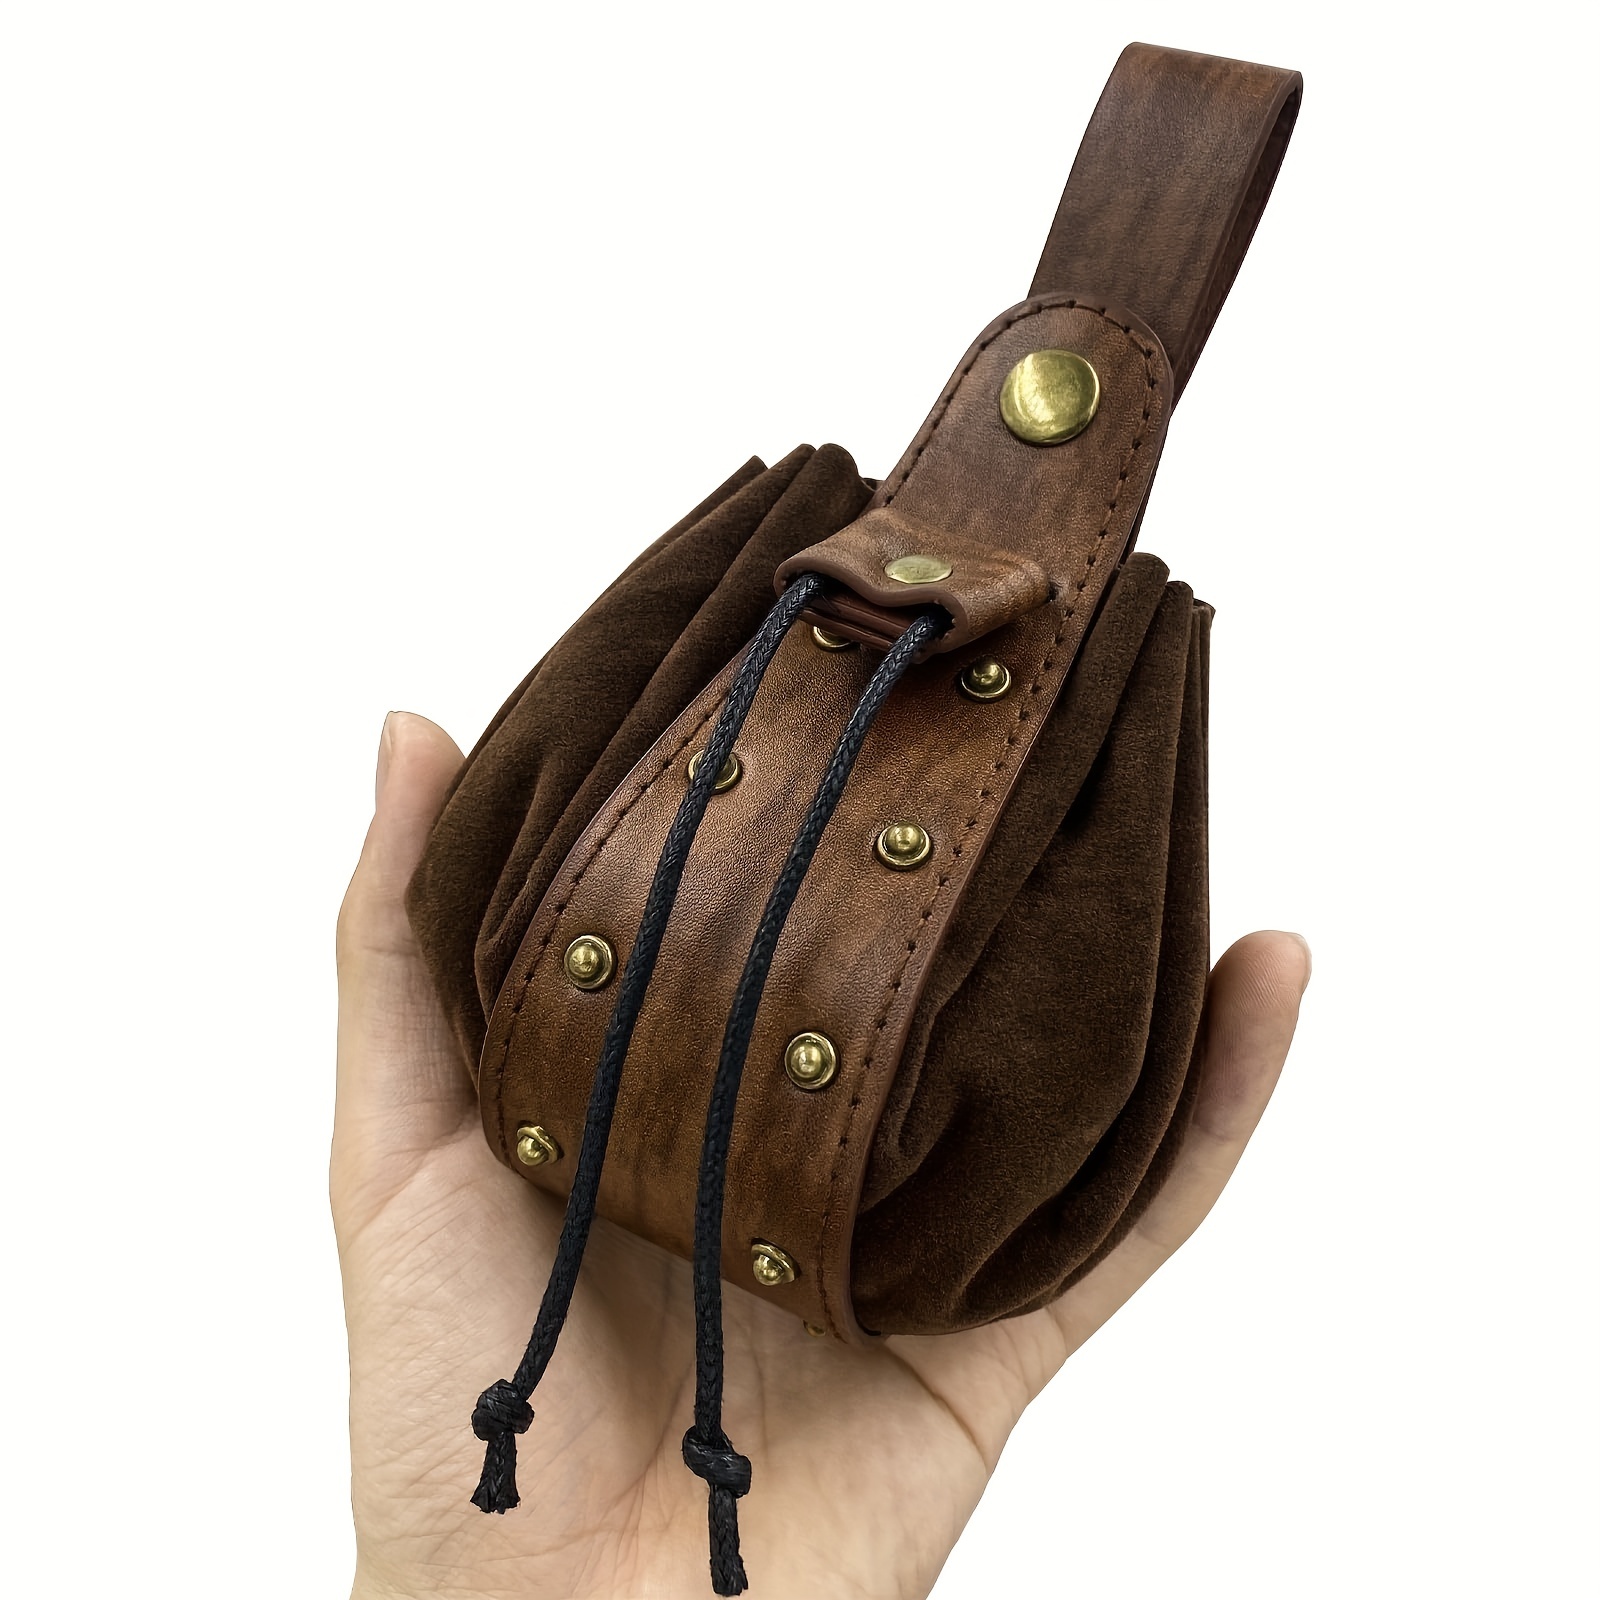 GORGECRAFT Leather Drawstring Pouch Medieval Vintage Waist Bag Phoenix  Pattern Printed Portable Fanny Pack Fashion Brown Dice Coin Purse for Women  Men